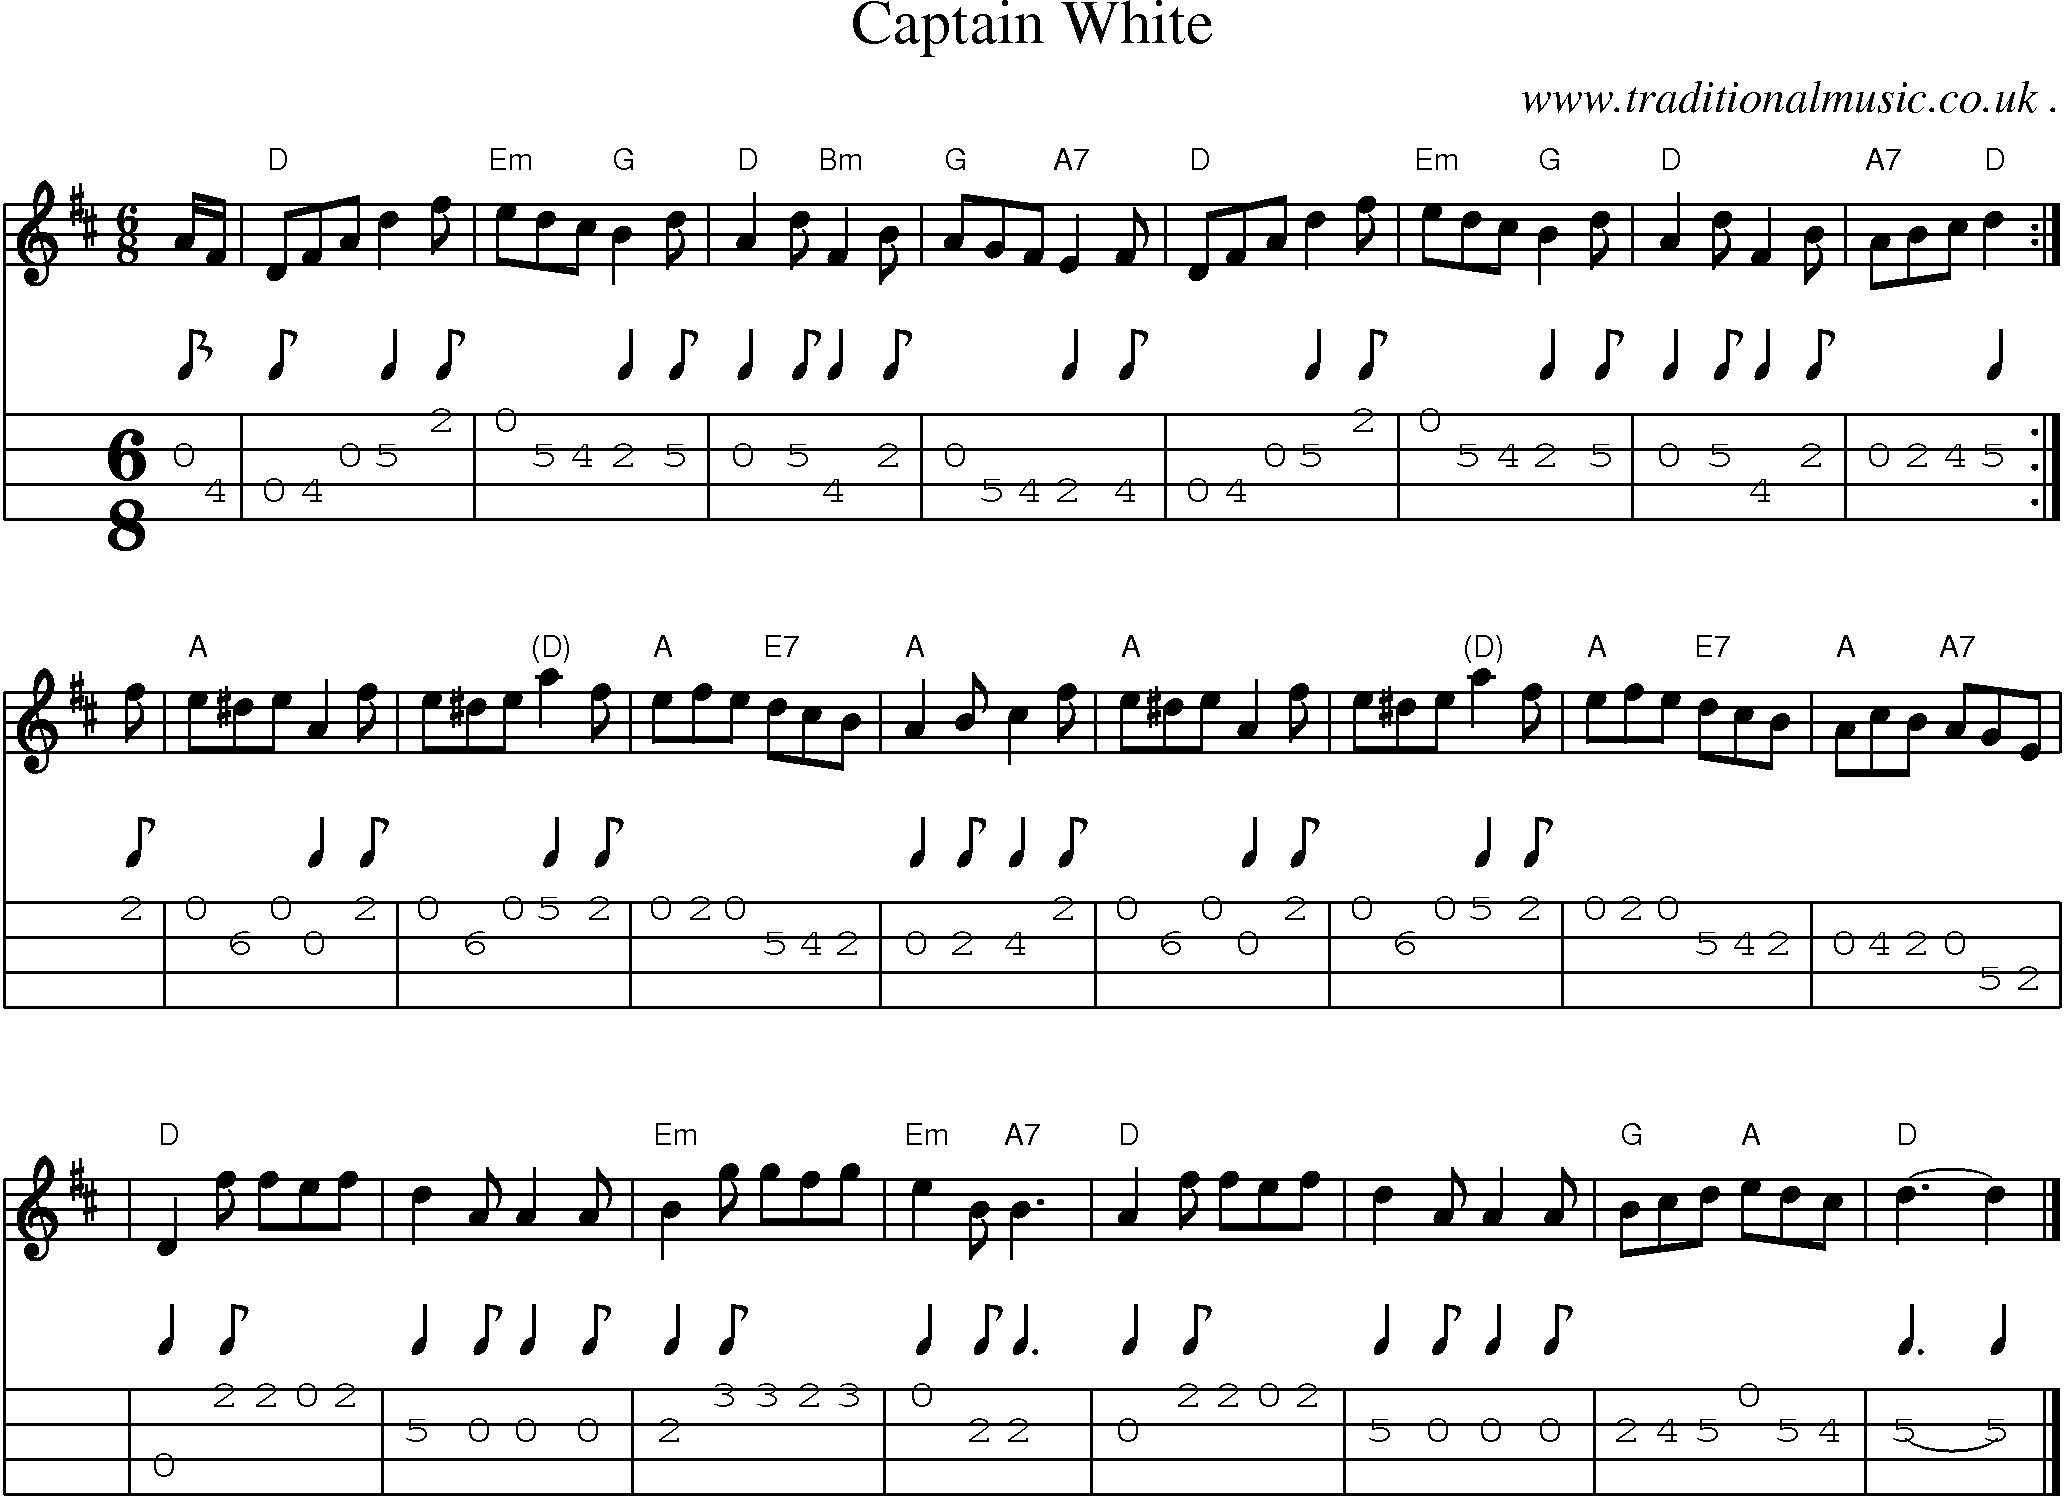 Sheet-music  score, Chords and Mandolin Tabs for Captain White